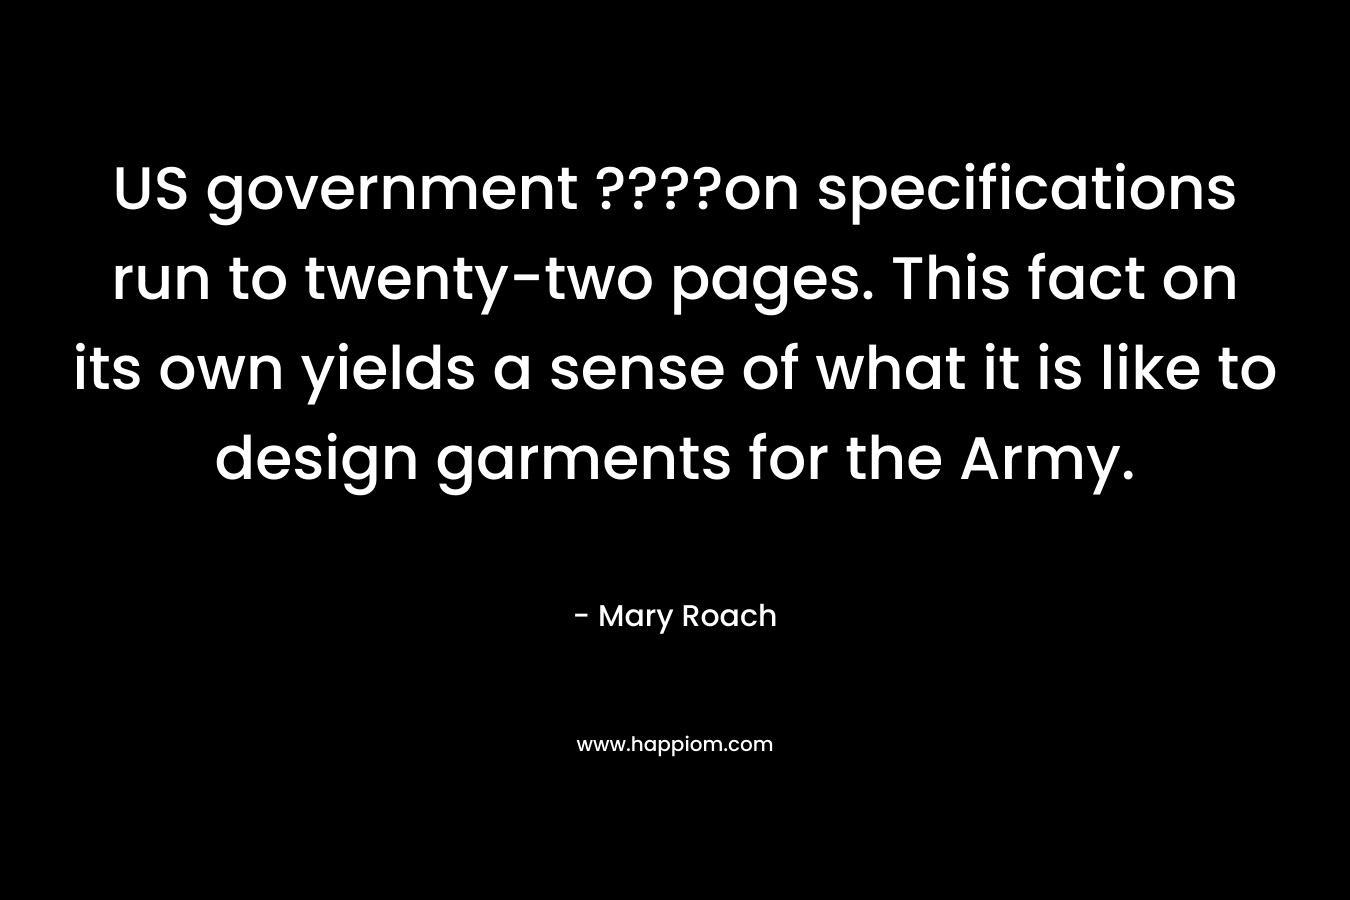 US government ????on specifications run to twenty-two pages. This fact on its own yields a sense of what it is like to design garments for the Army.